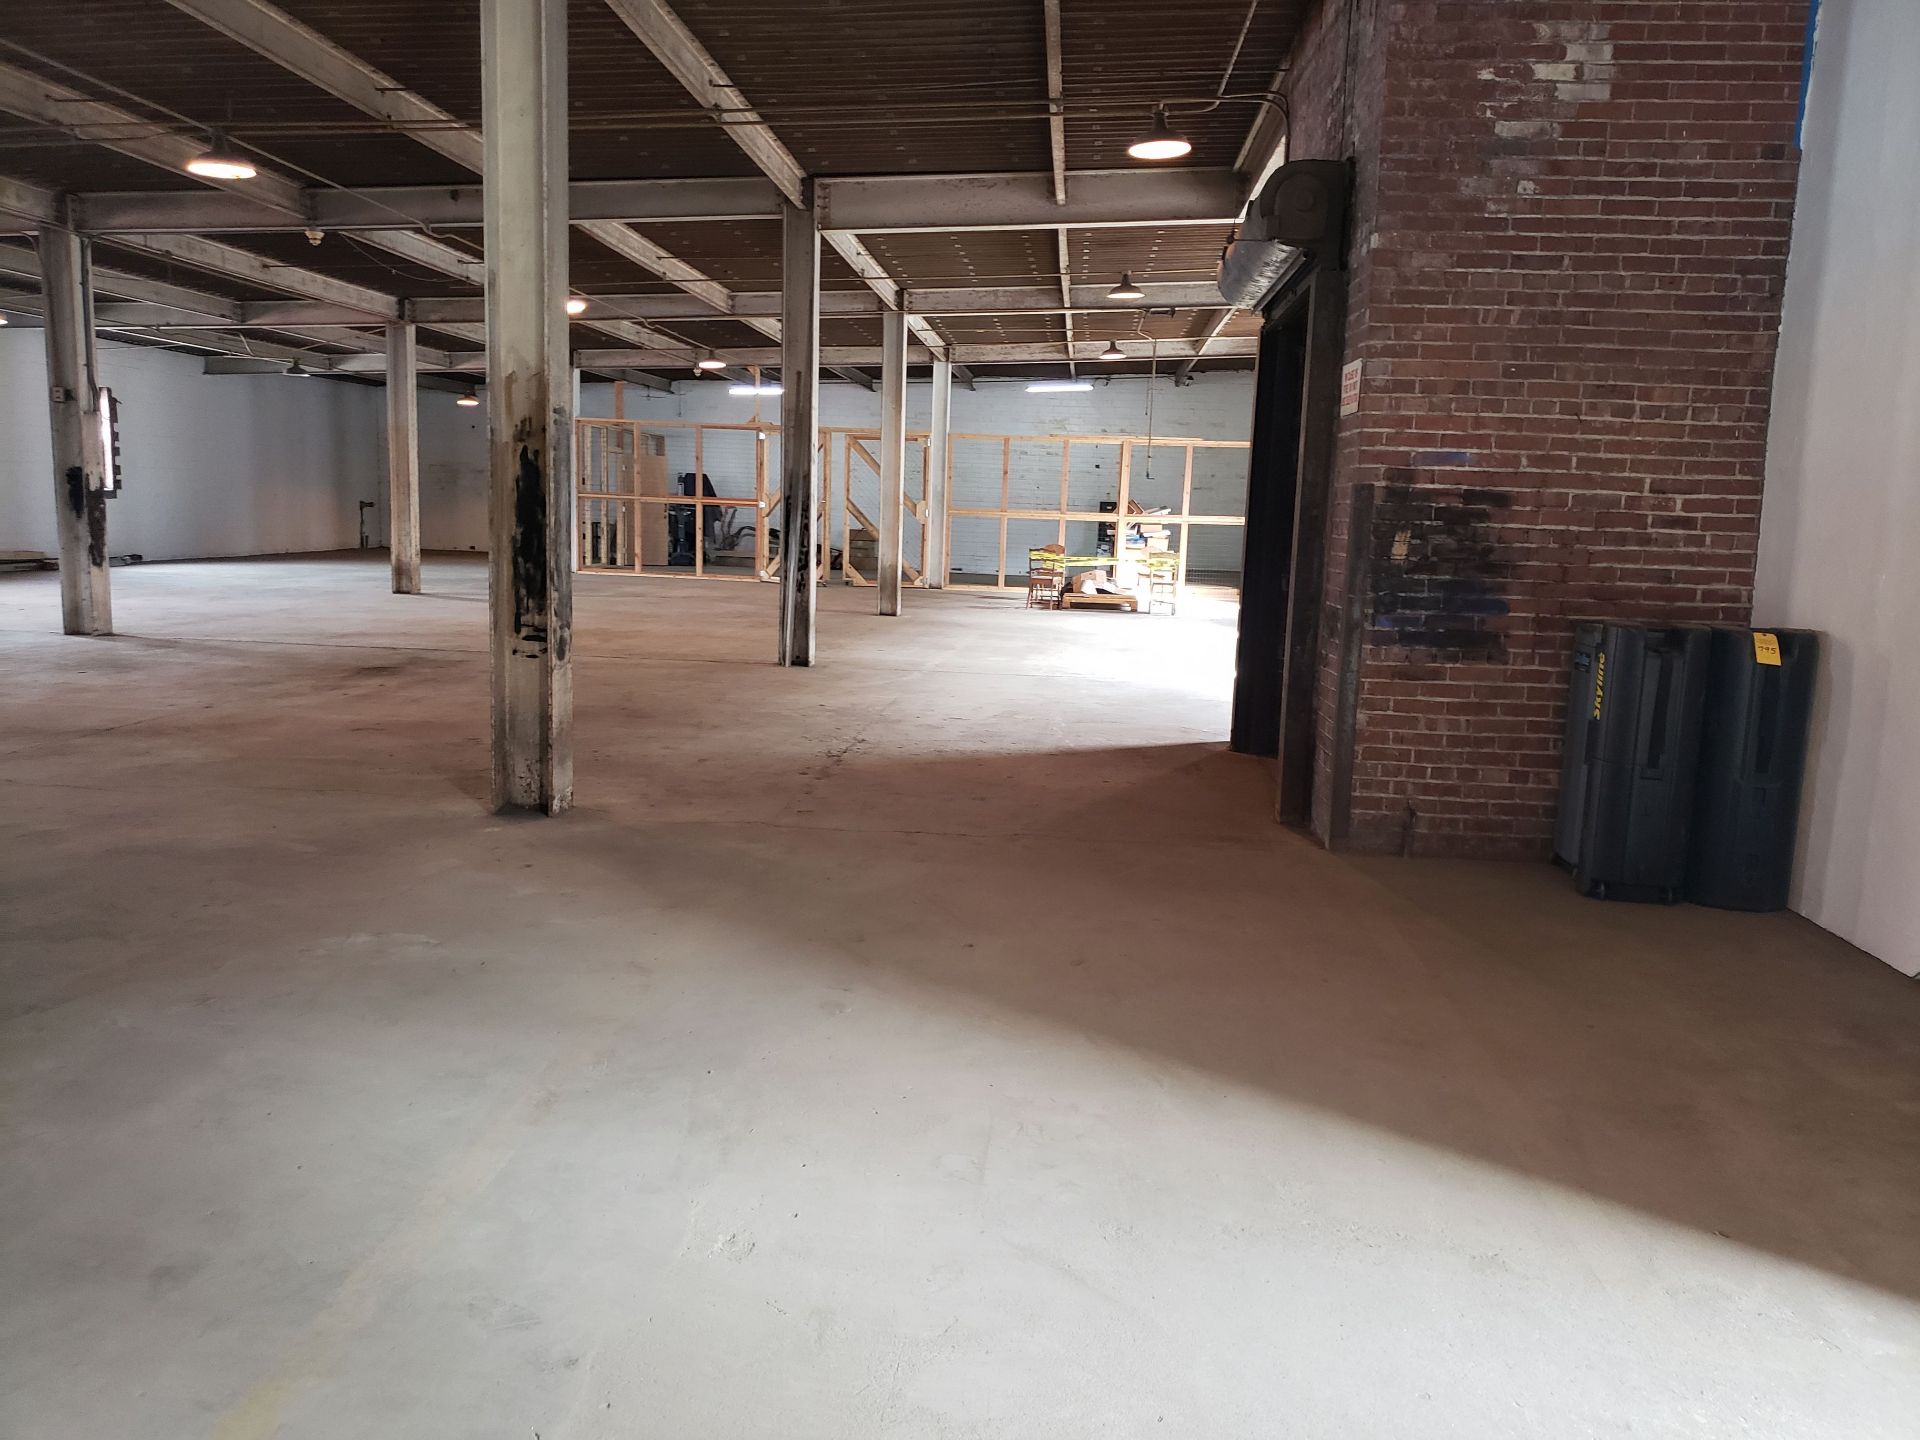 =/- 30,000 SF three story building with truck access, rail runs next to building - Image 51 of 58